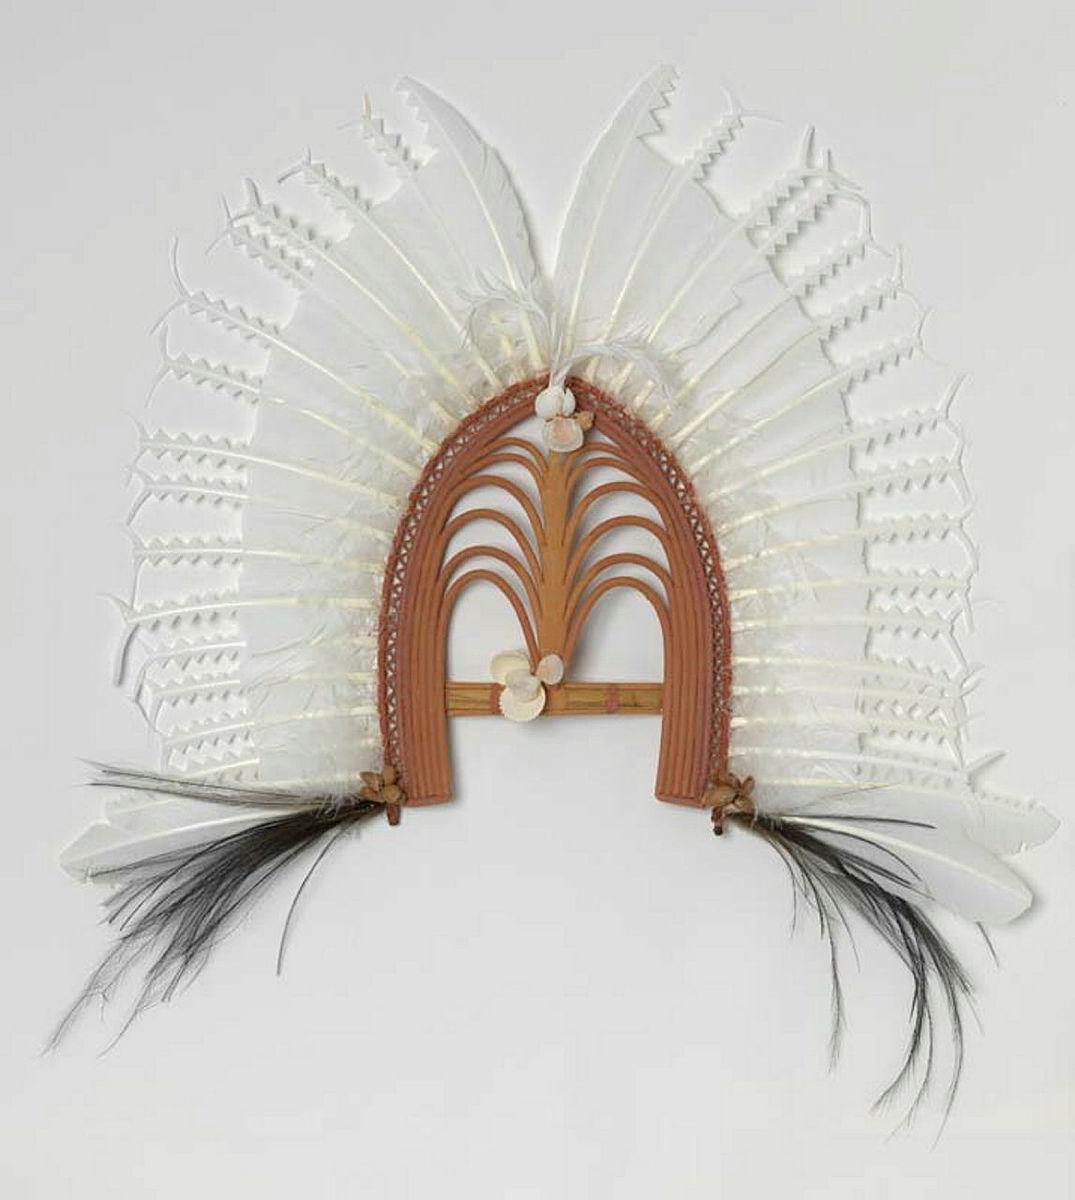 Artwork Ceremonial dhoeri this artwork made of Cane, bamboo, string with natural pigments, bees wax, shell, seed, eagle, cassowary and heron feathers, created in 2008-01-01